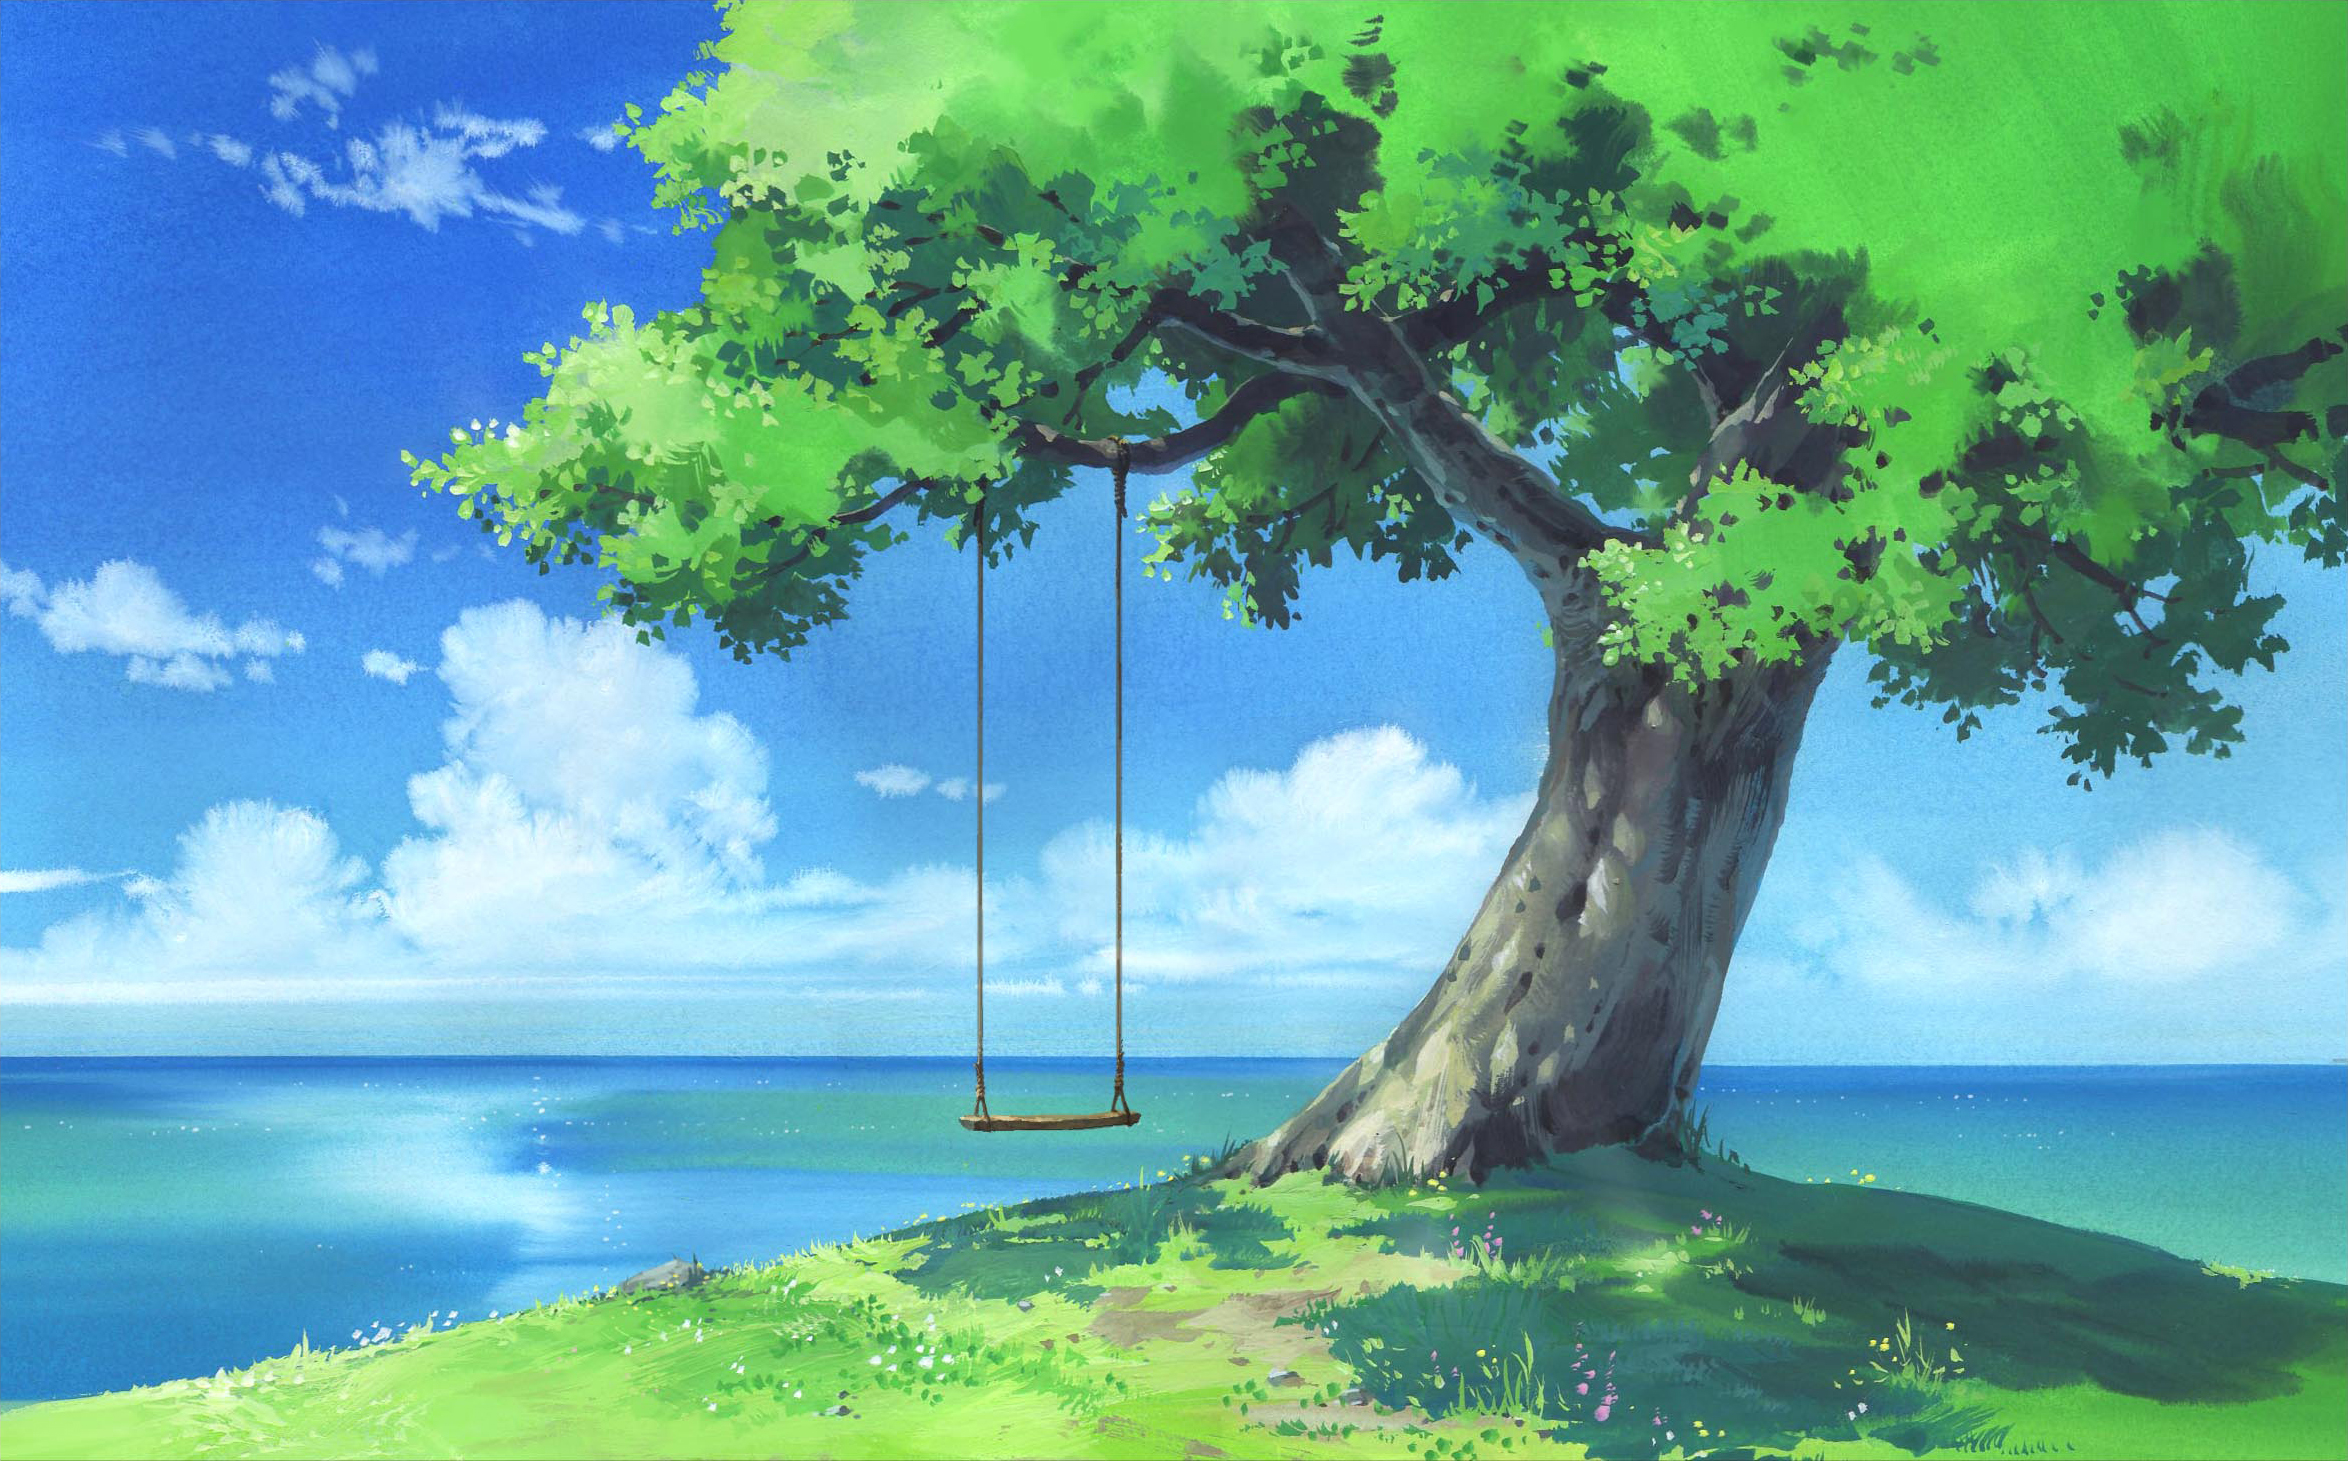 xzcxc Tree Roots Anime Scenery Poster Canvas Poster Bedroom Decor Sports  Landscape Office Room Decor GiftFrame-Style 28x28inch(70x70cm) : Amazon.ca:  Home